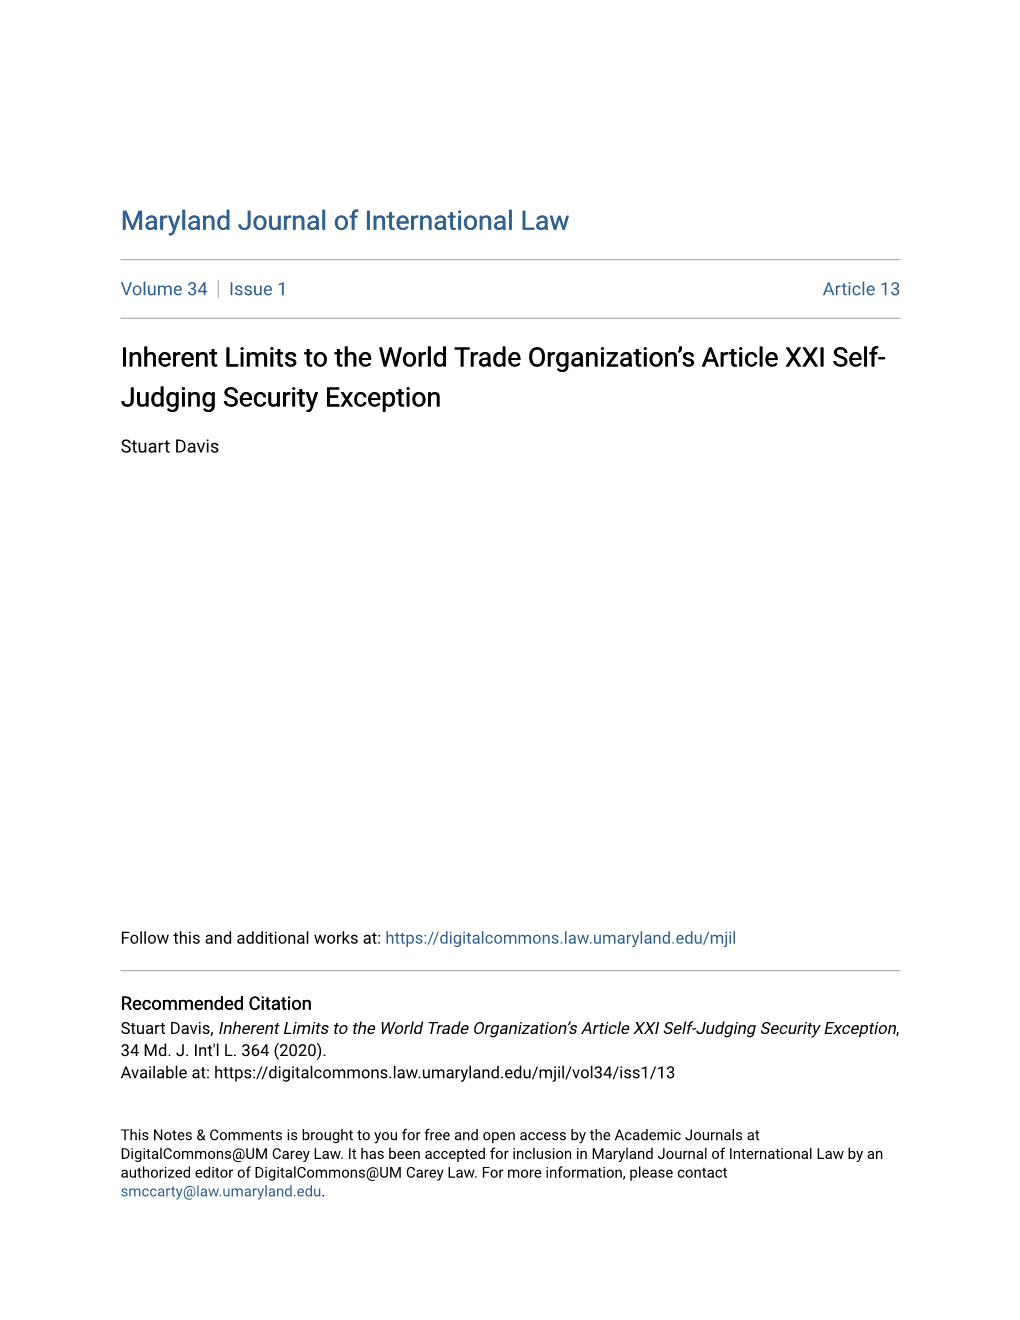 Inherent Limits to the World Trade Organization's Article XXI Self